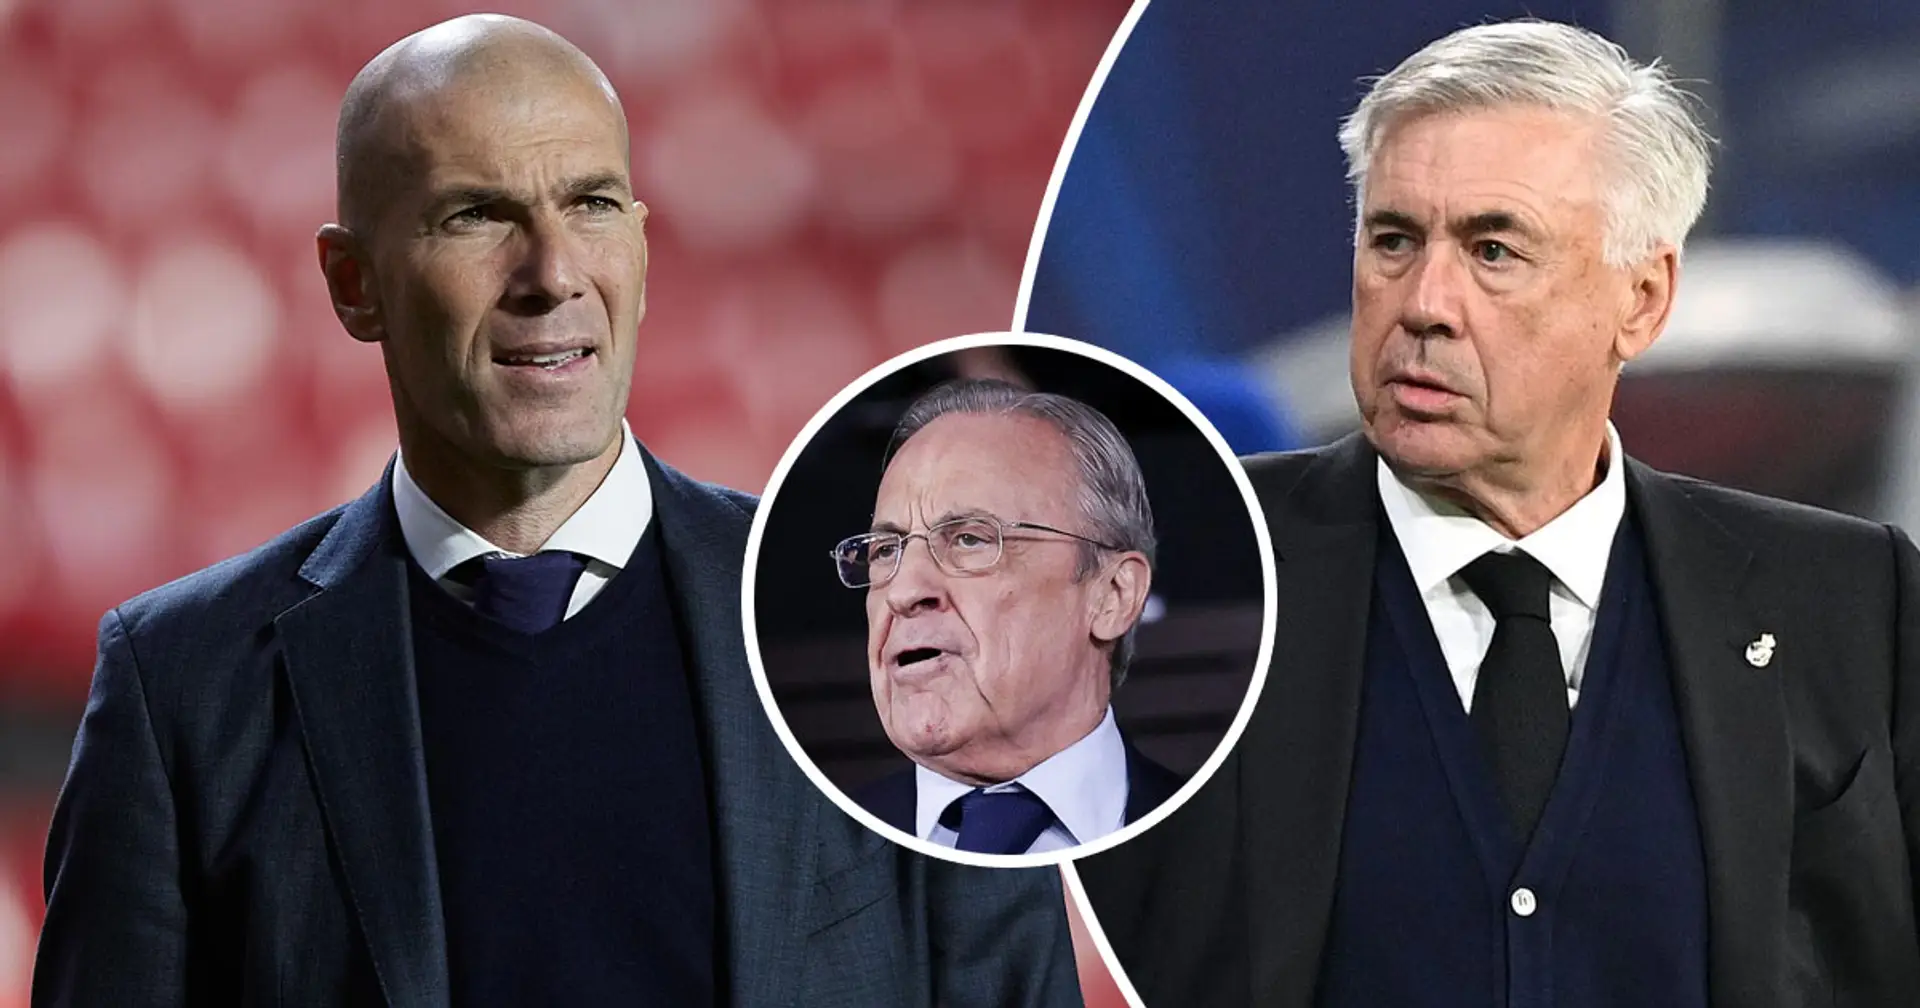 Real Madrid open talks with Zidane as possible Ancelotti replacement (reliability: 4 stars)